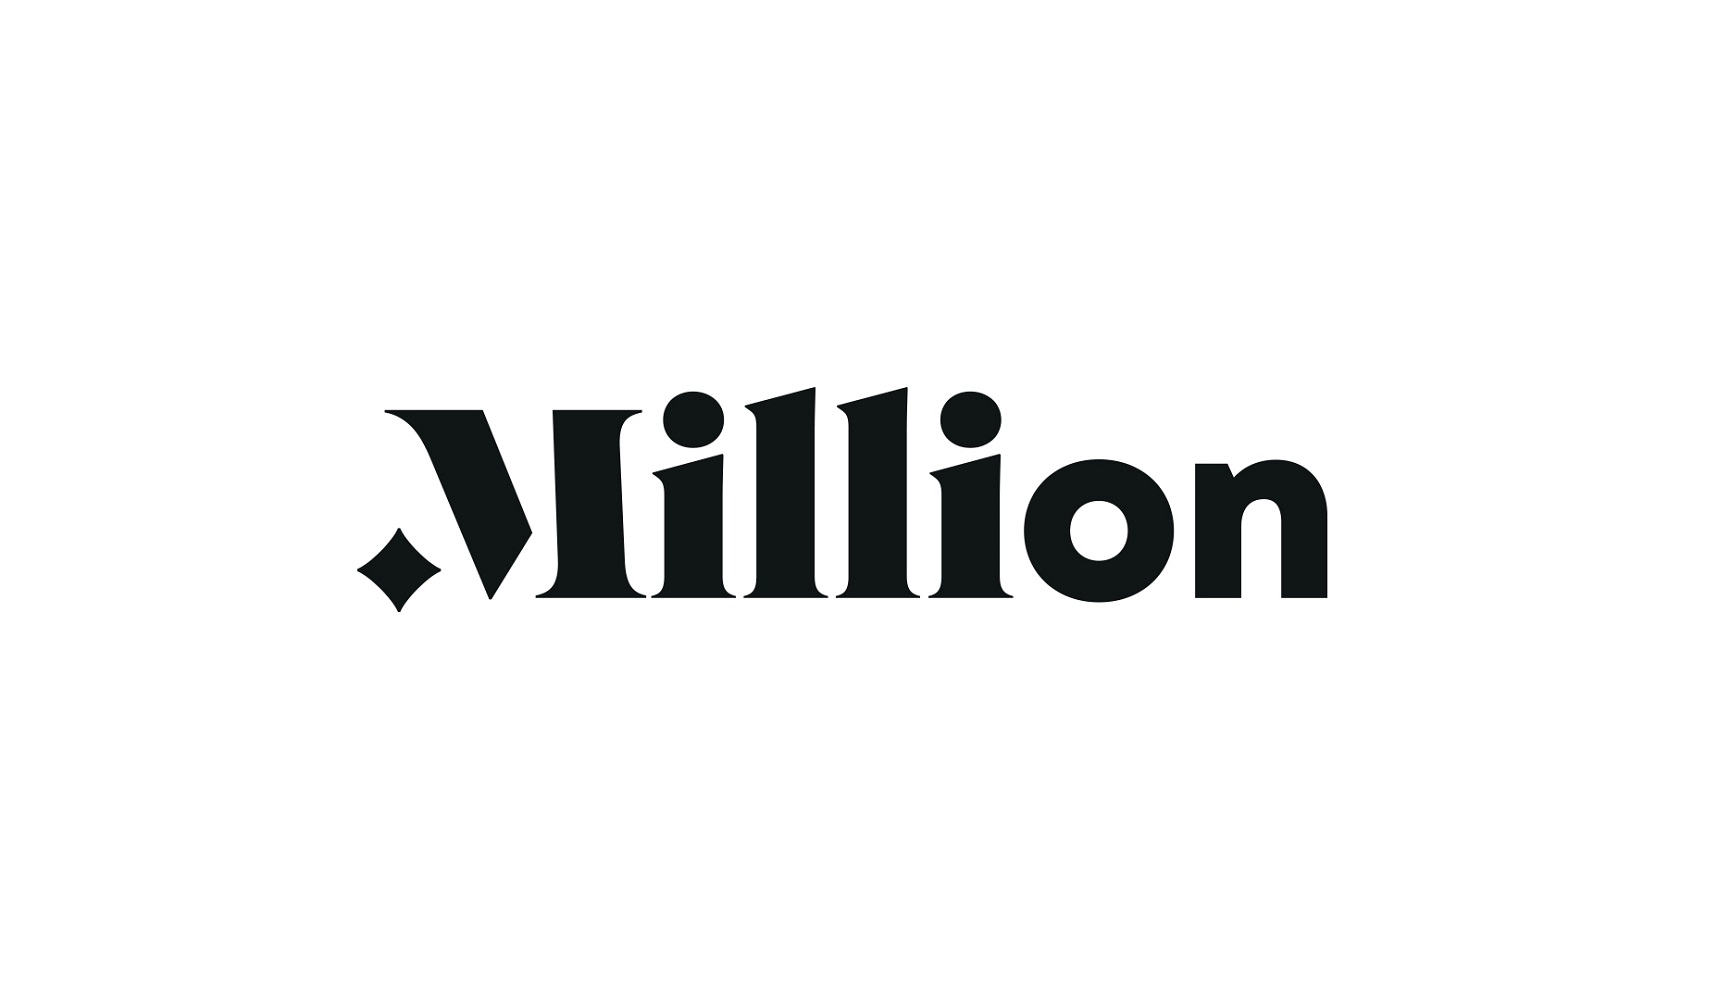 Social Media Platform Million Set to Launch by End of Year